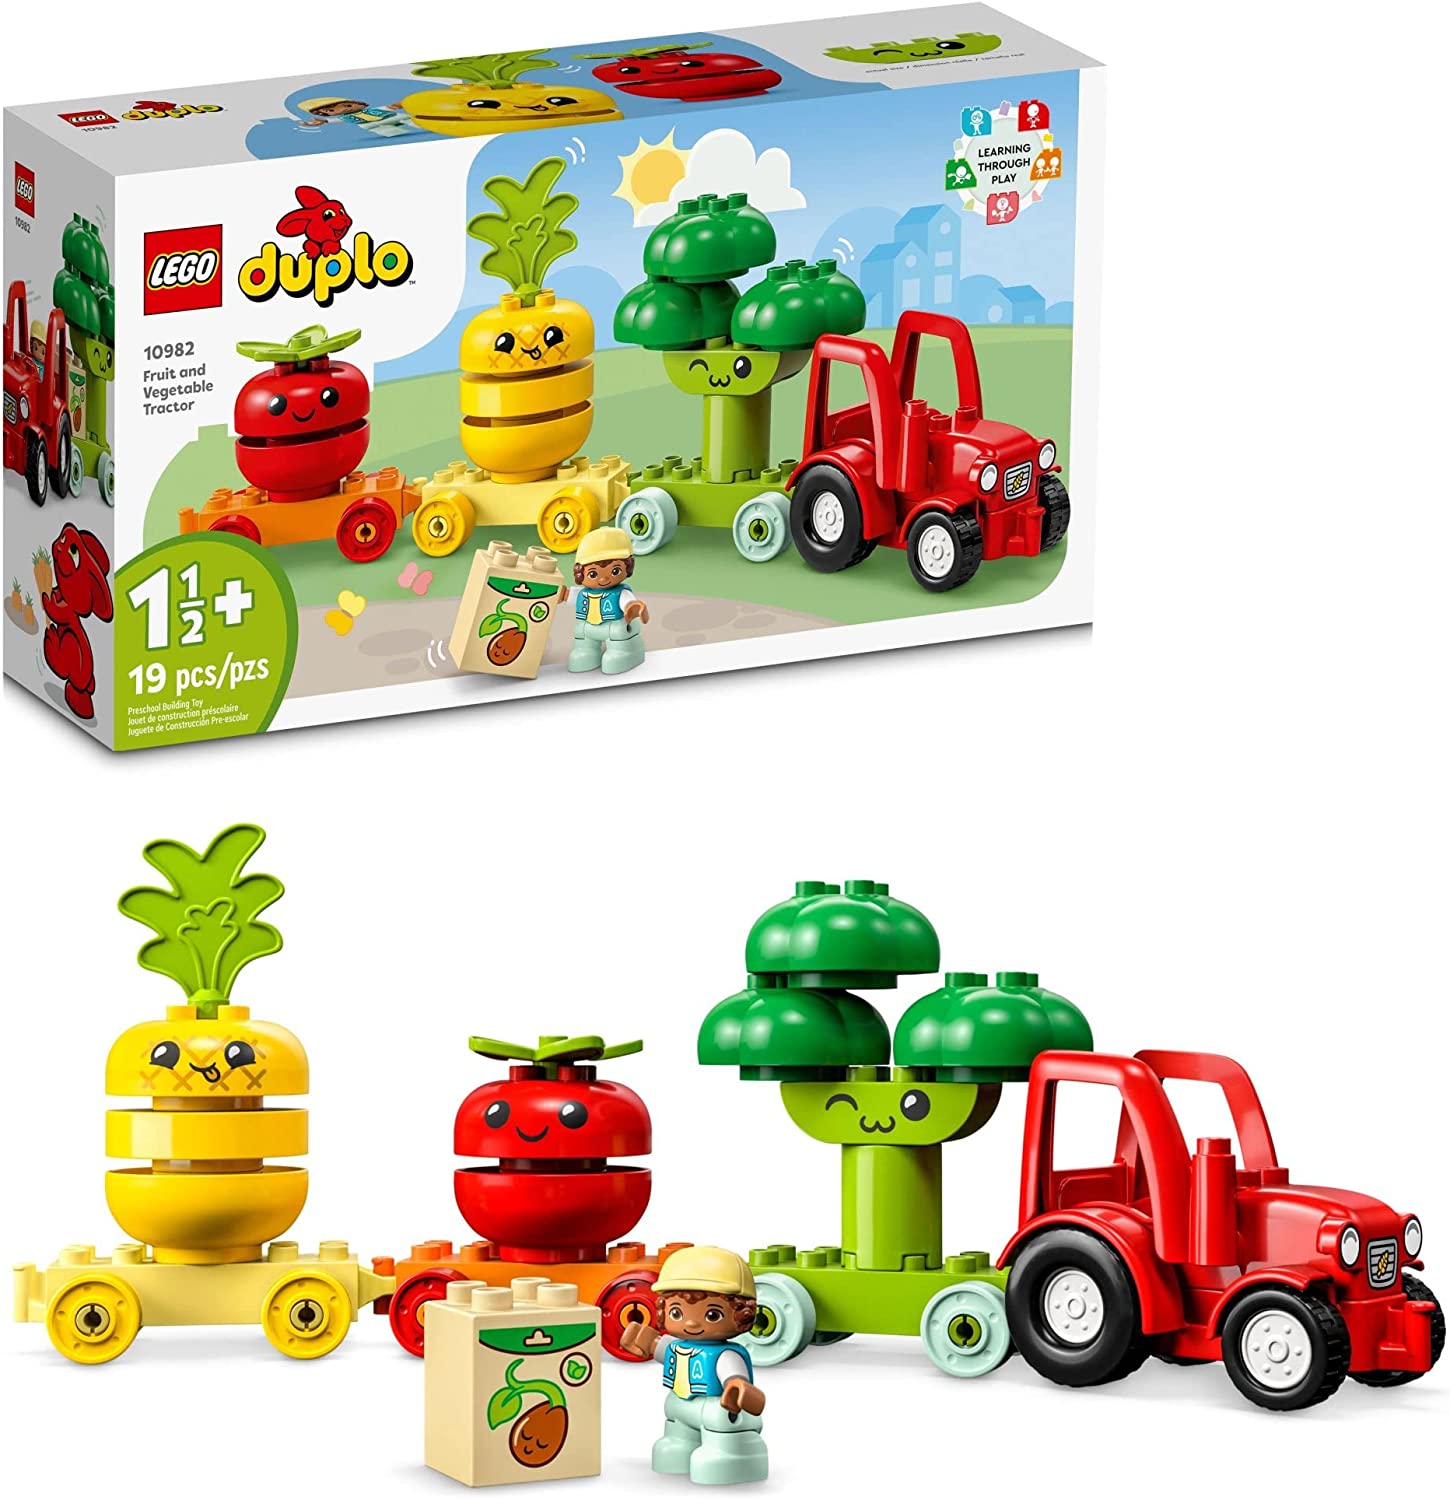 LEGO DUPLO My First Fruit and Vegetable Tractor Toy 10982, Stacking and Color Sorting Toys for Babies and Toddlers Ages